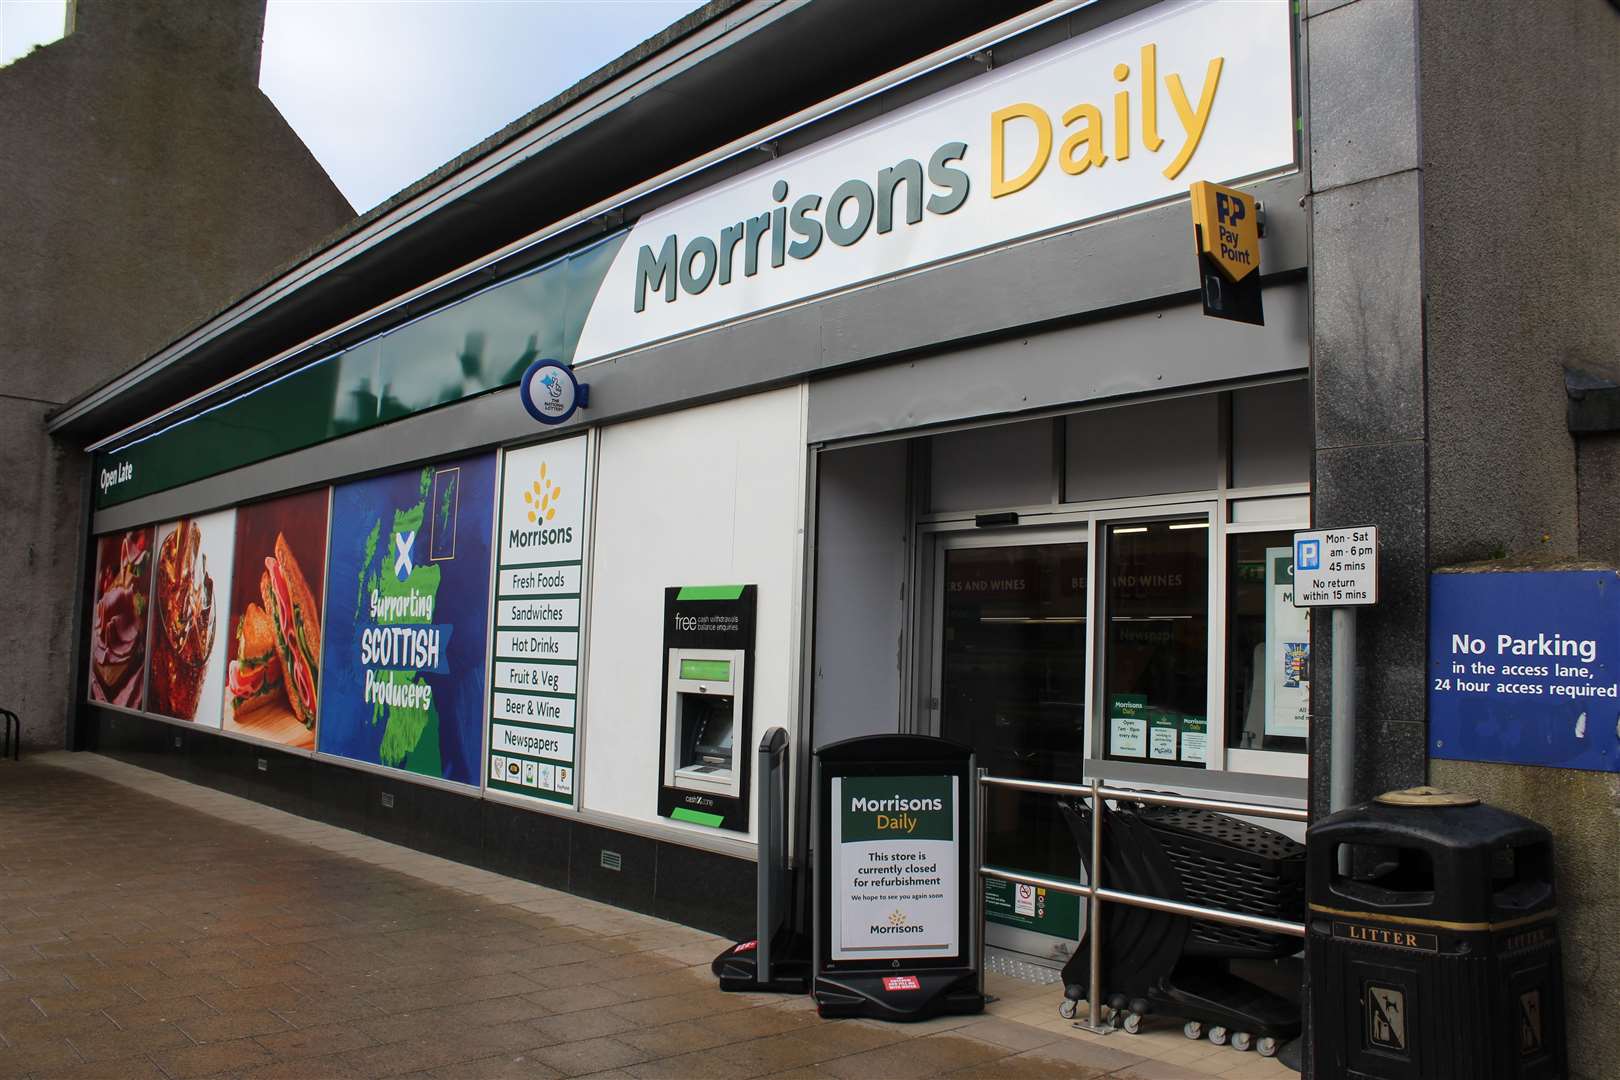 The McColl's store in Banff was recently rebranded to a Morrisons Daily.